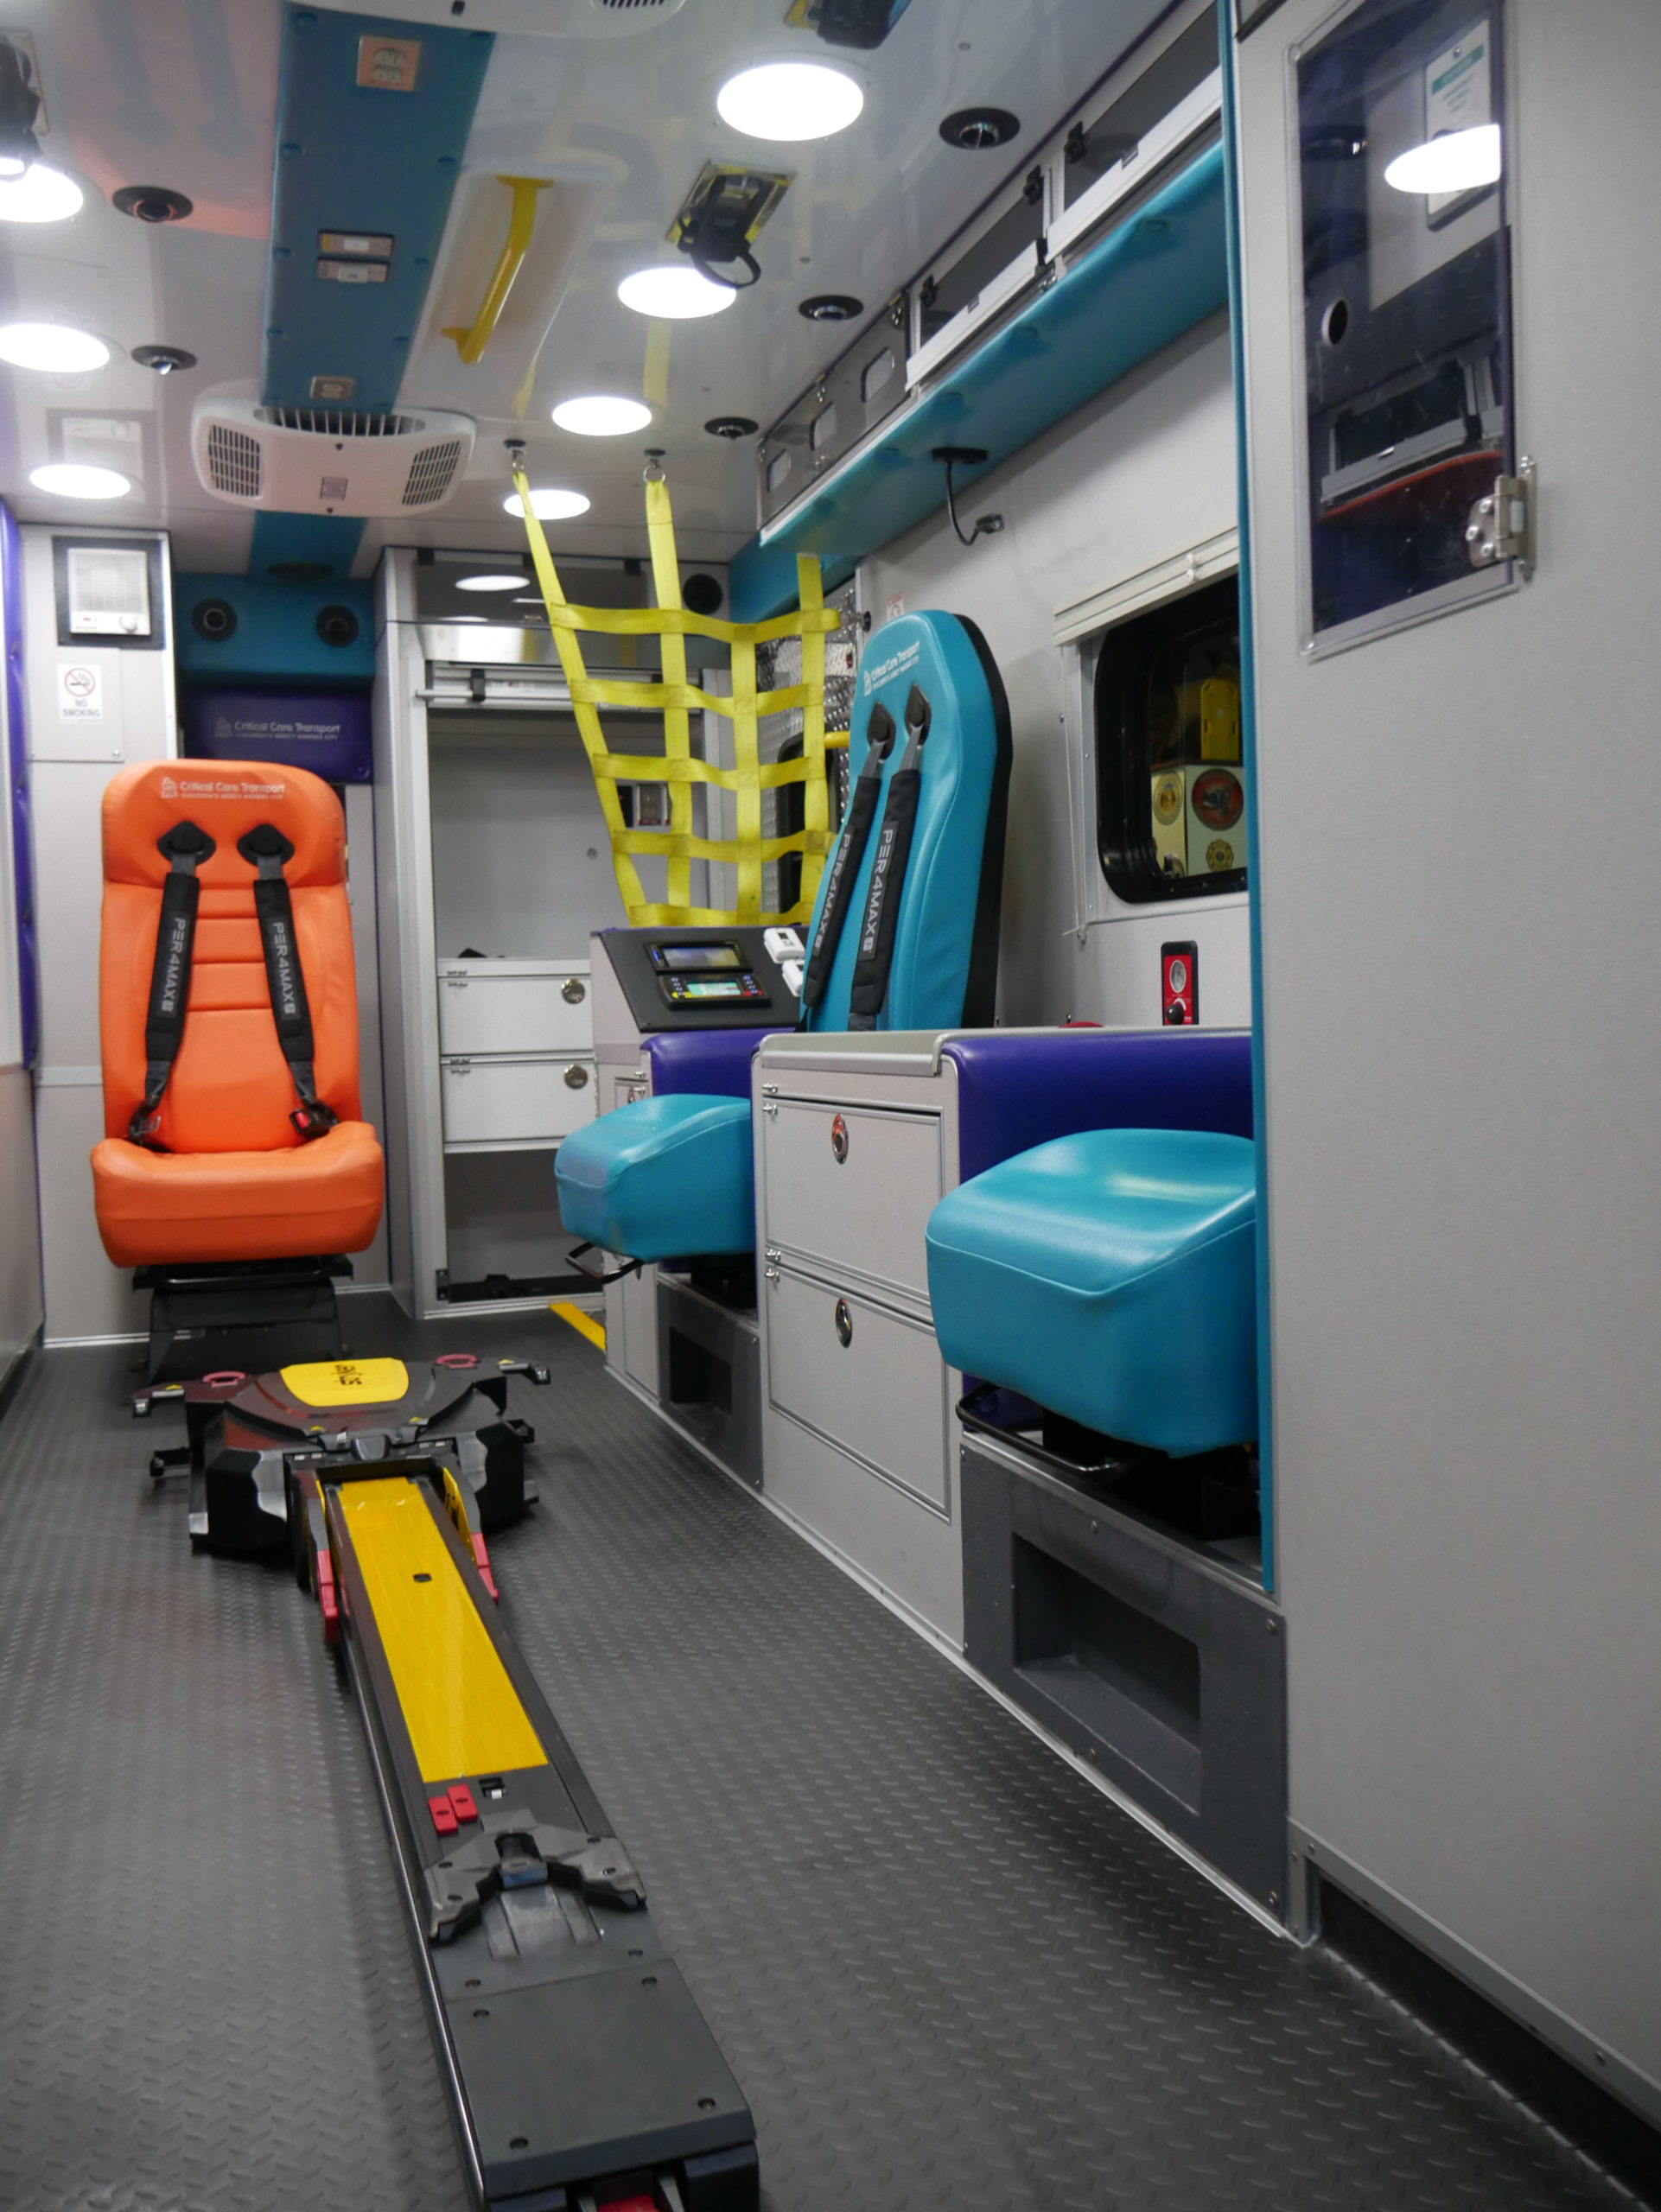 2021 Children's Mercy Remounted Critical Care Transport